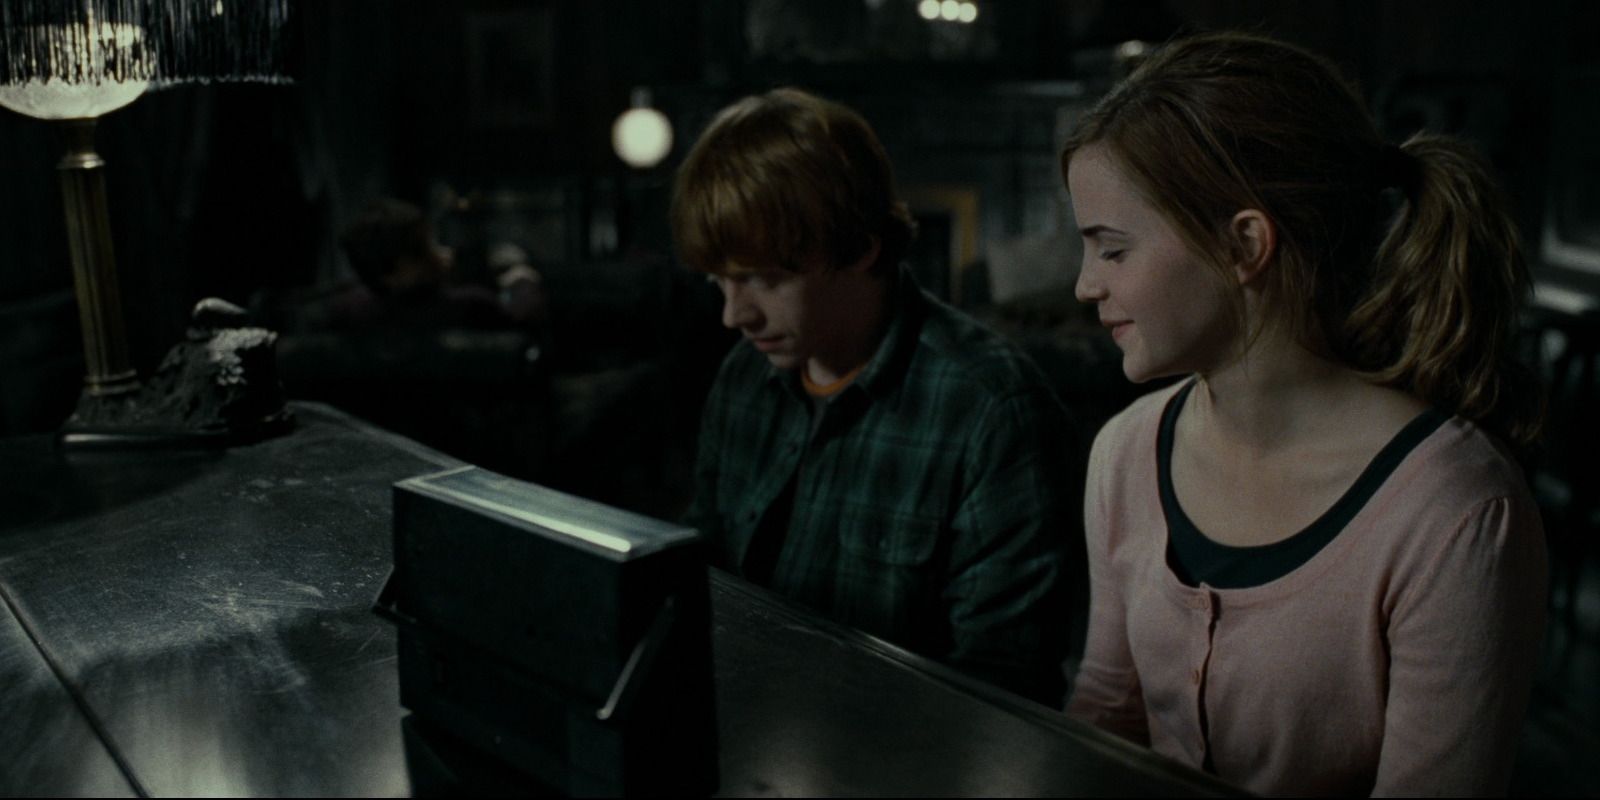 Hermione teaches Ron how to play piano